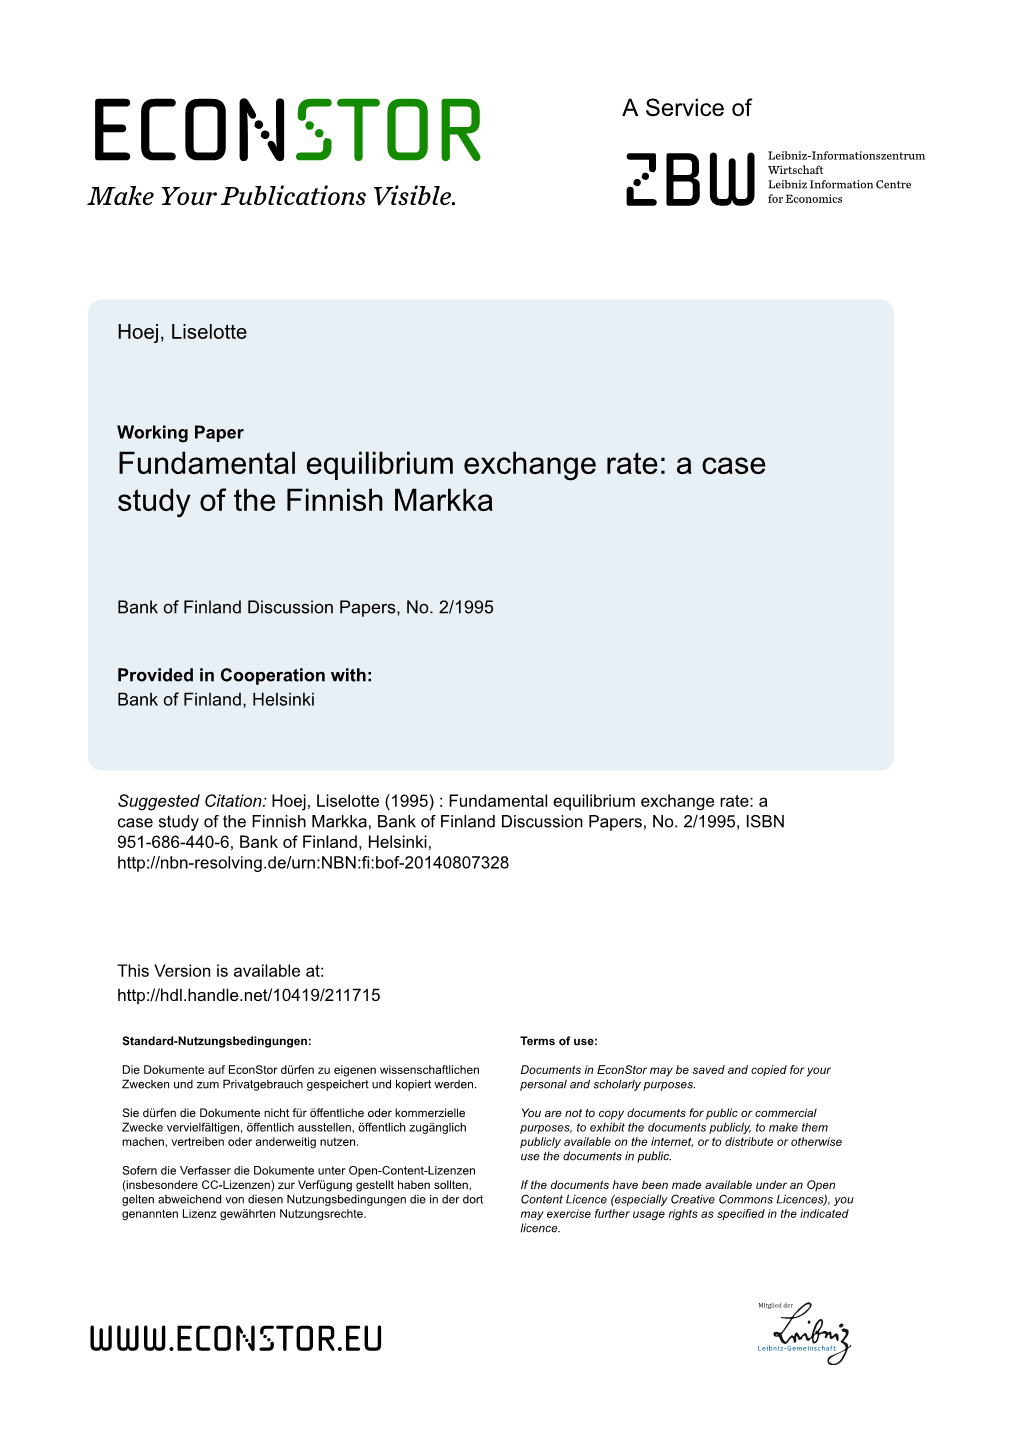 Fundamental Equilibrium Exchange Rate: a Case Study of the Finnish Markka